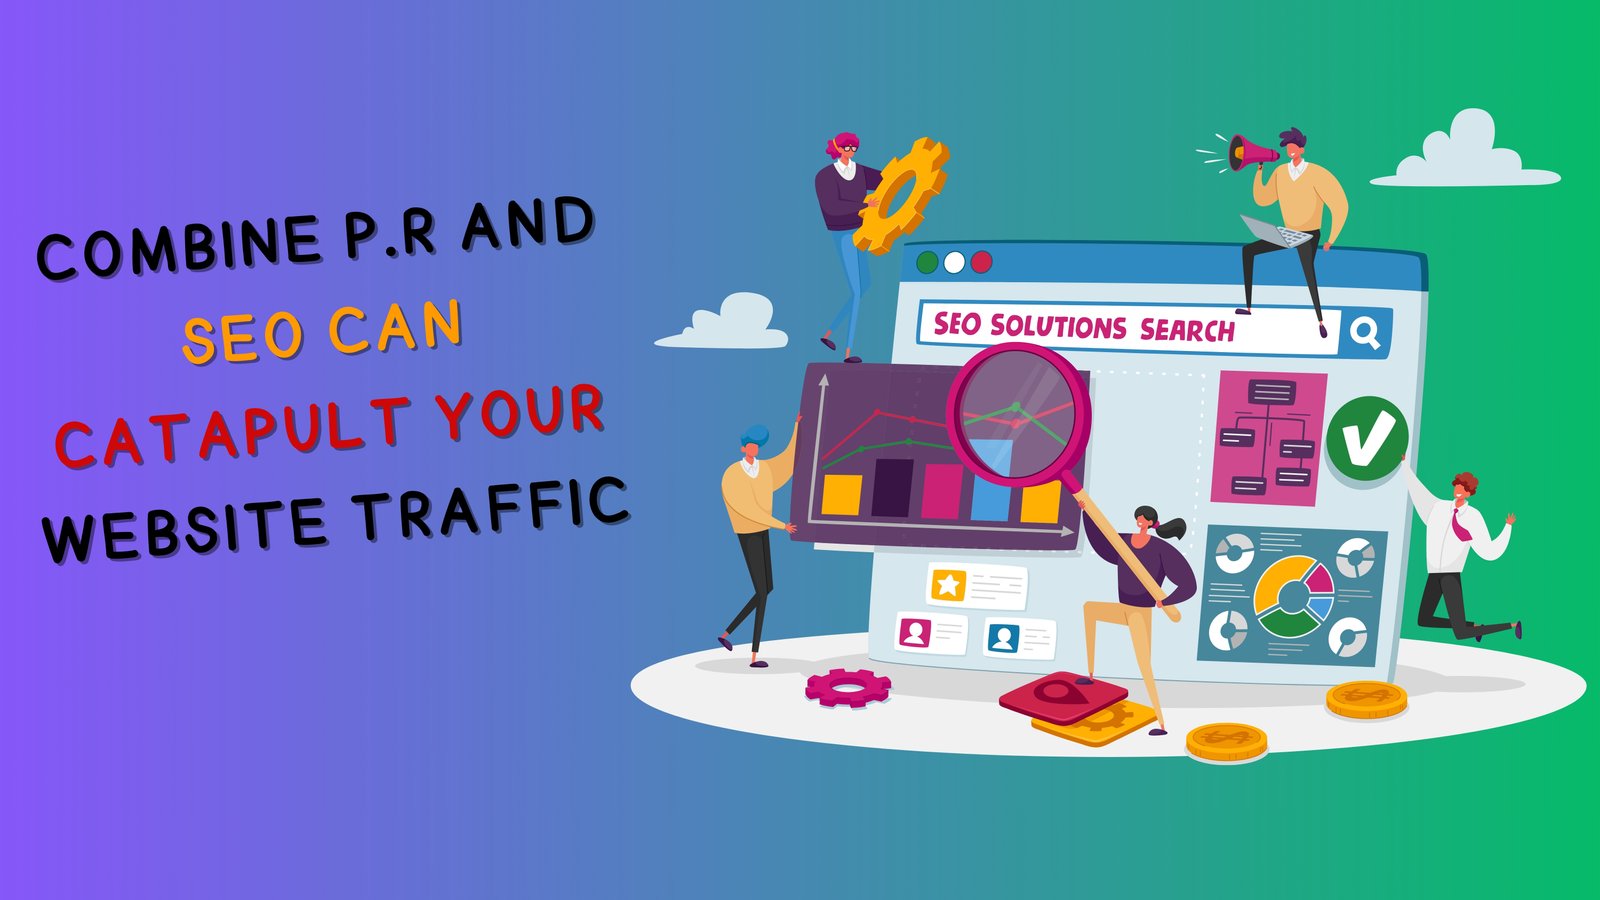 Combining P.R. and SEO Can Catapult Your Website Traffic